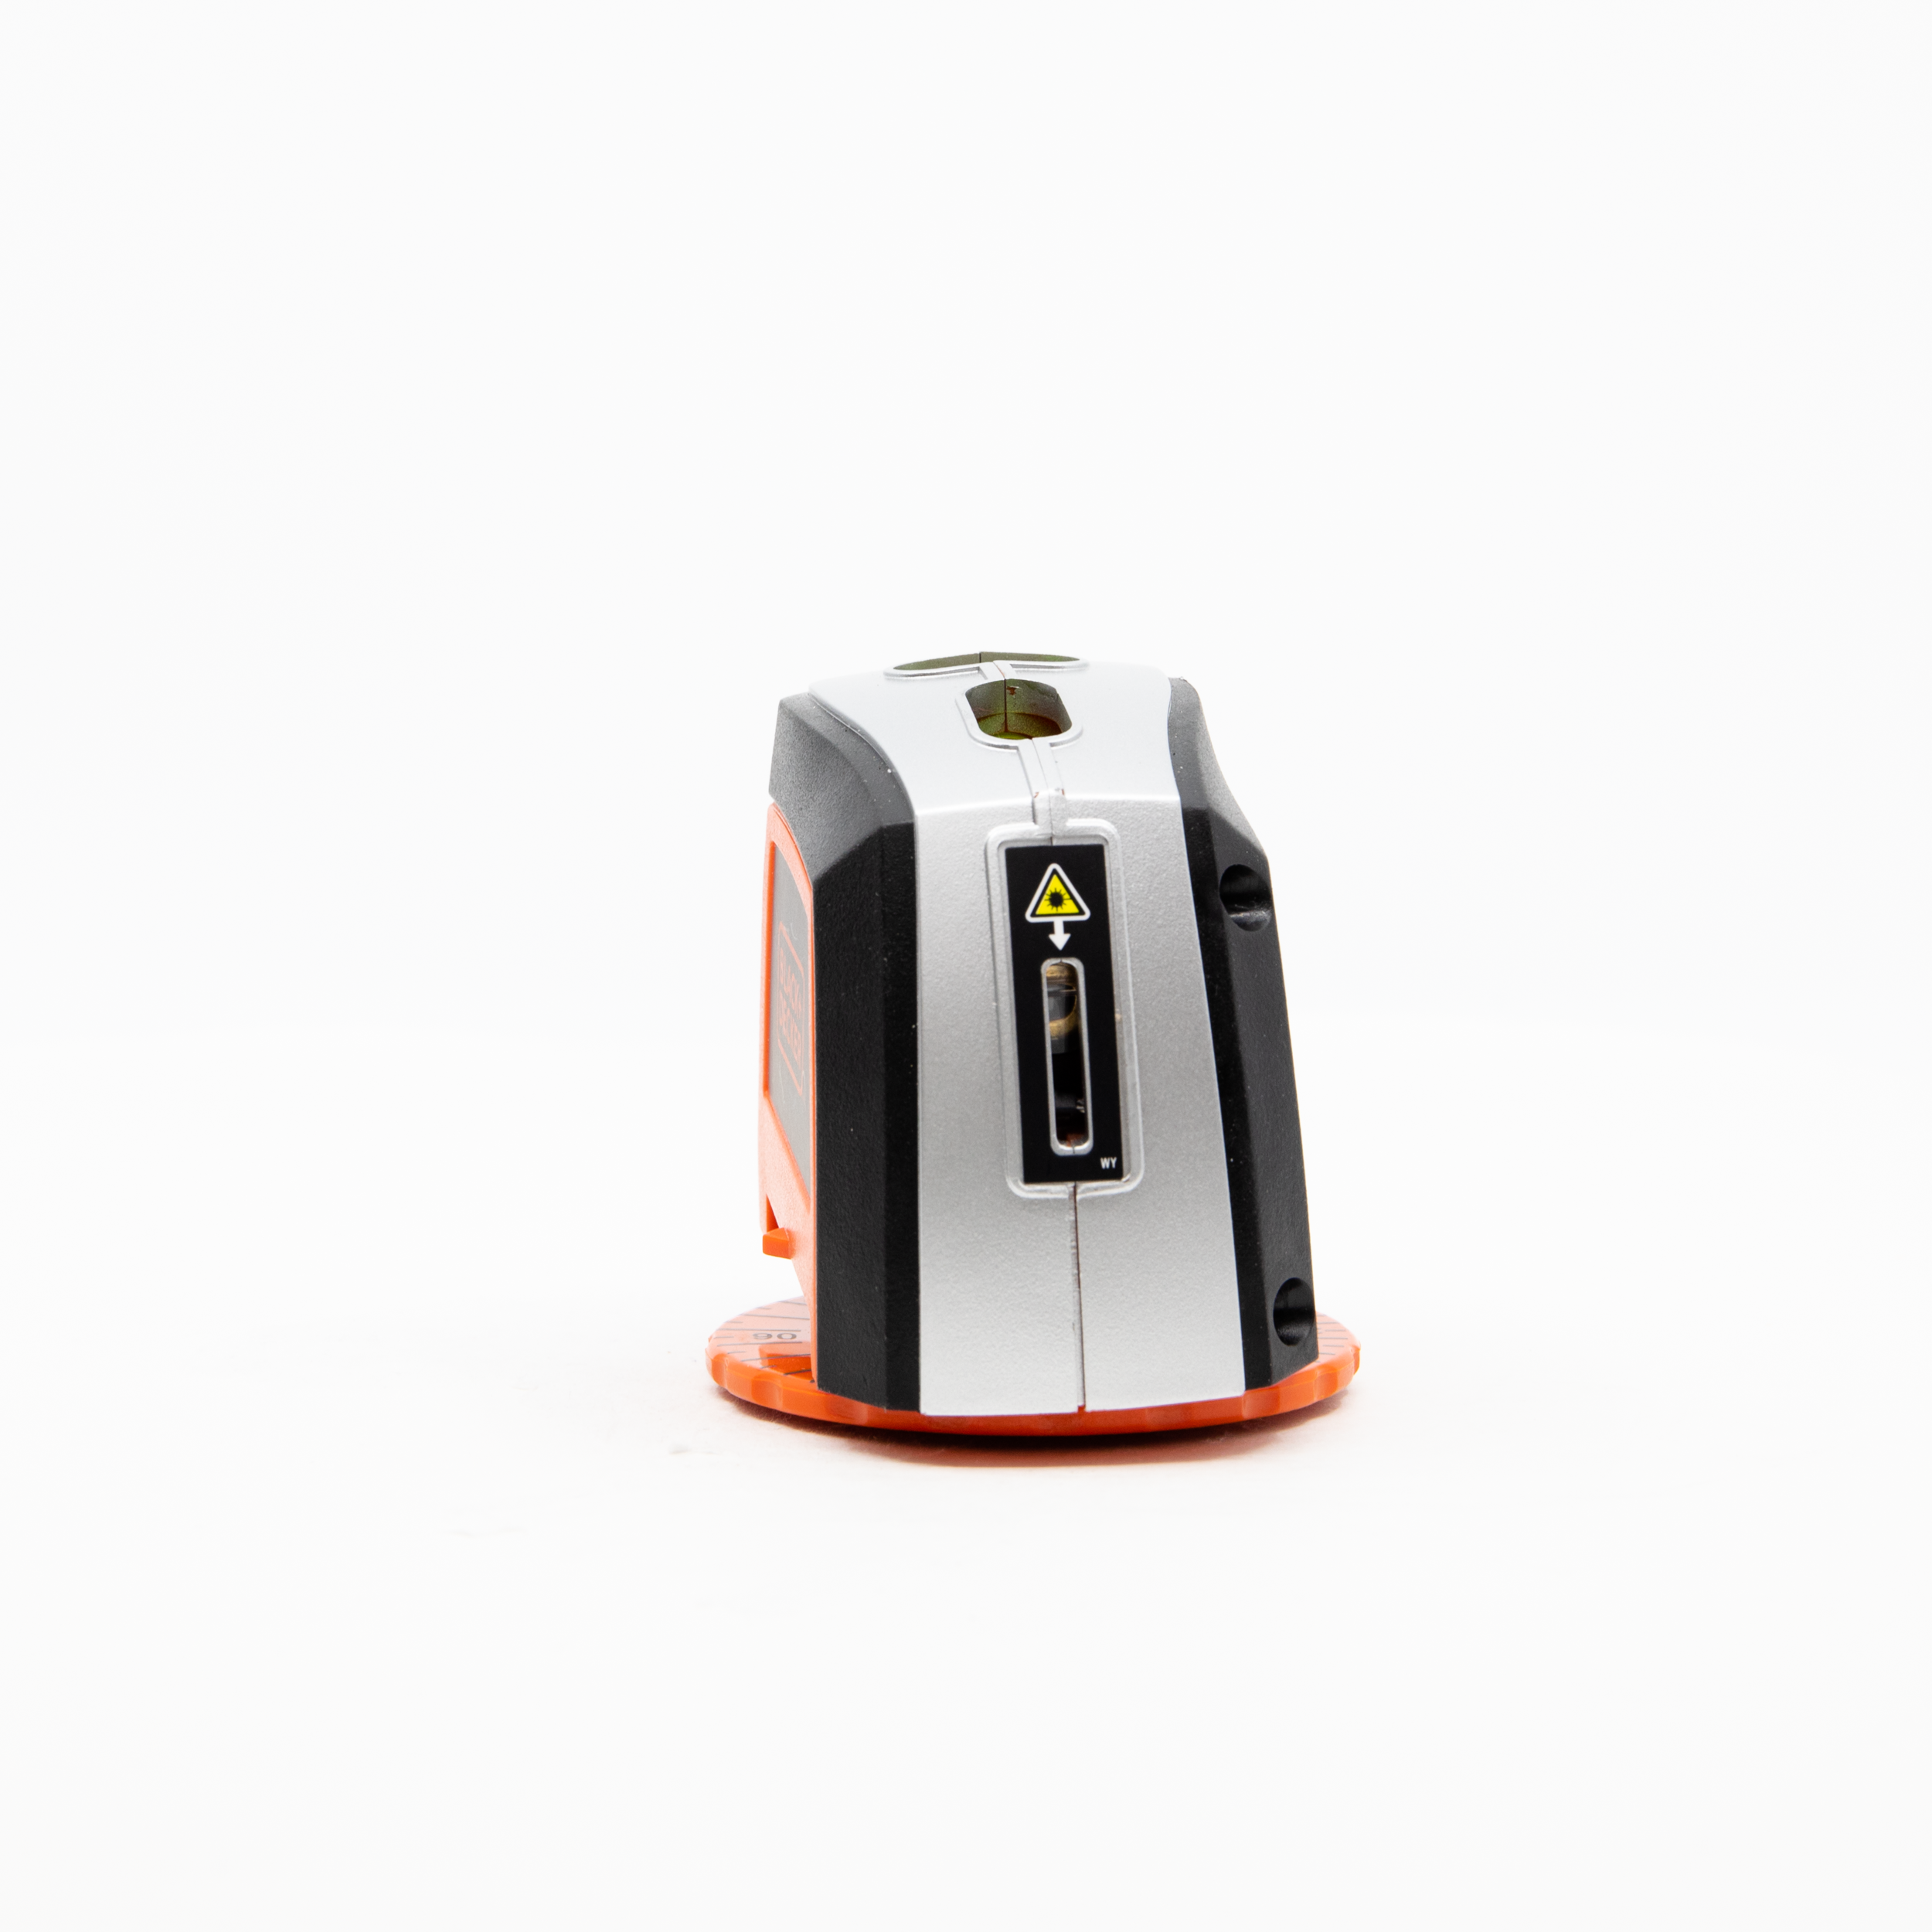 Black And Decker Laser Level Review And How To Use 